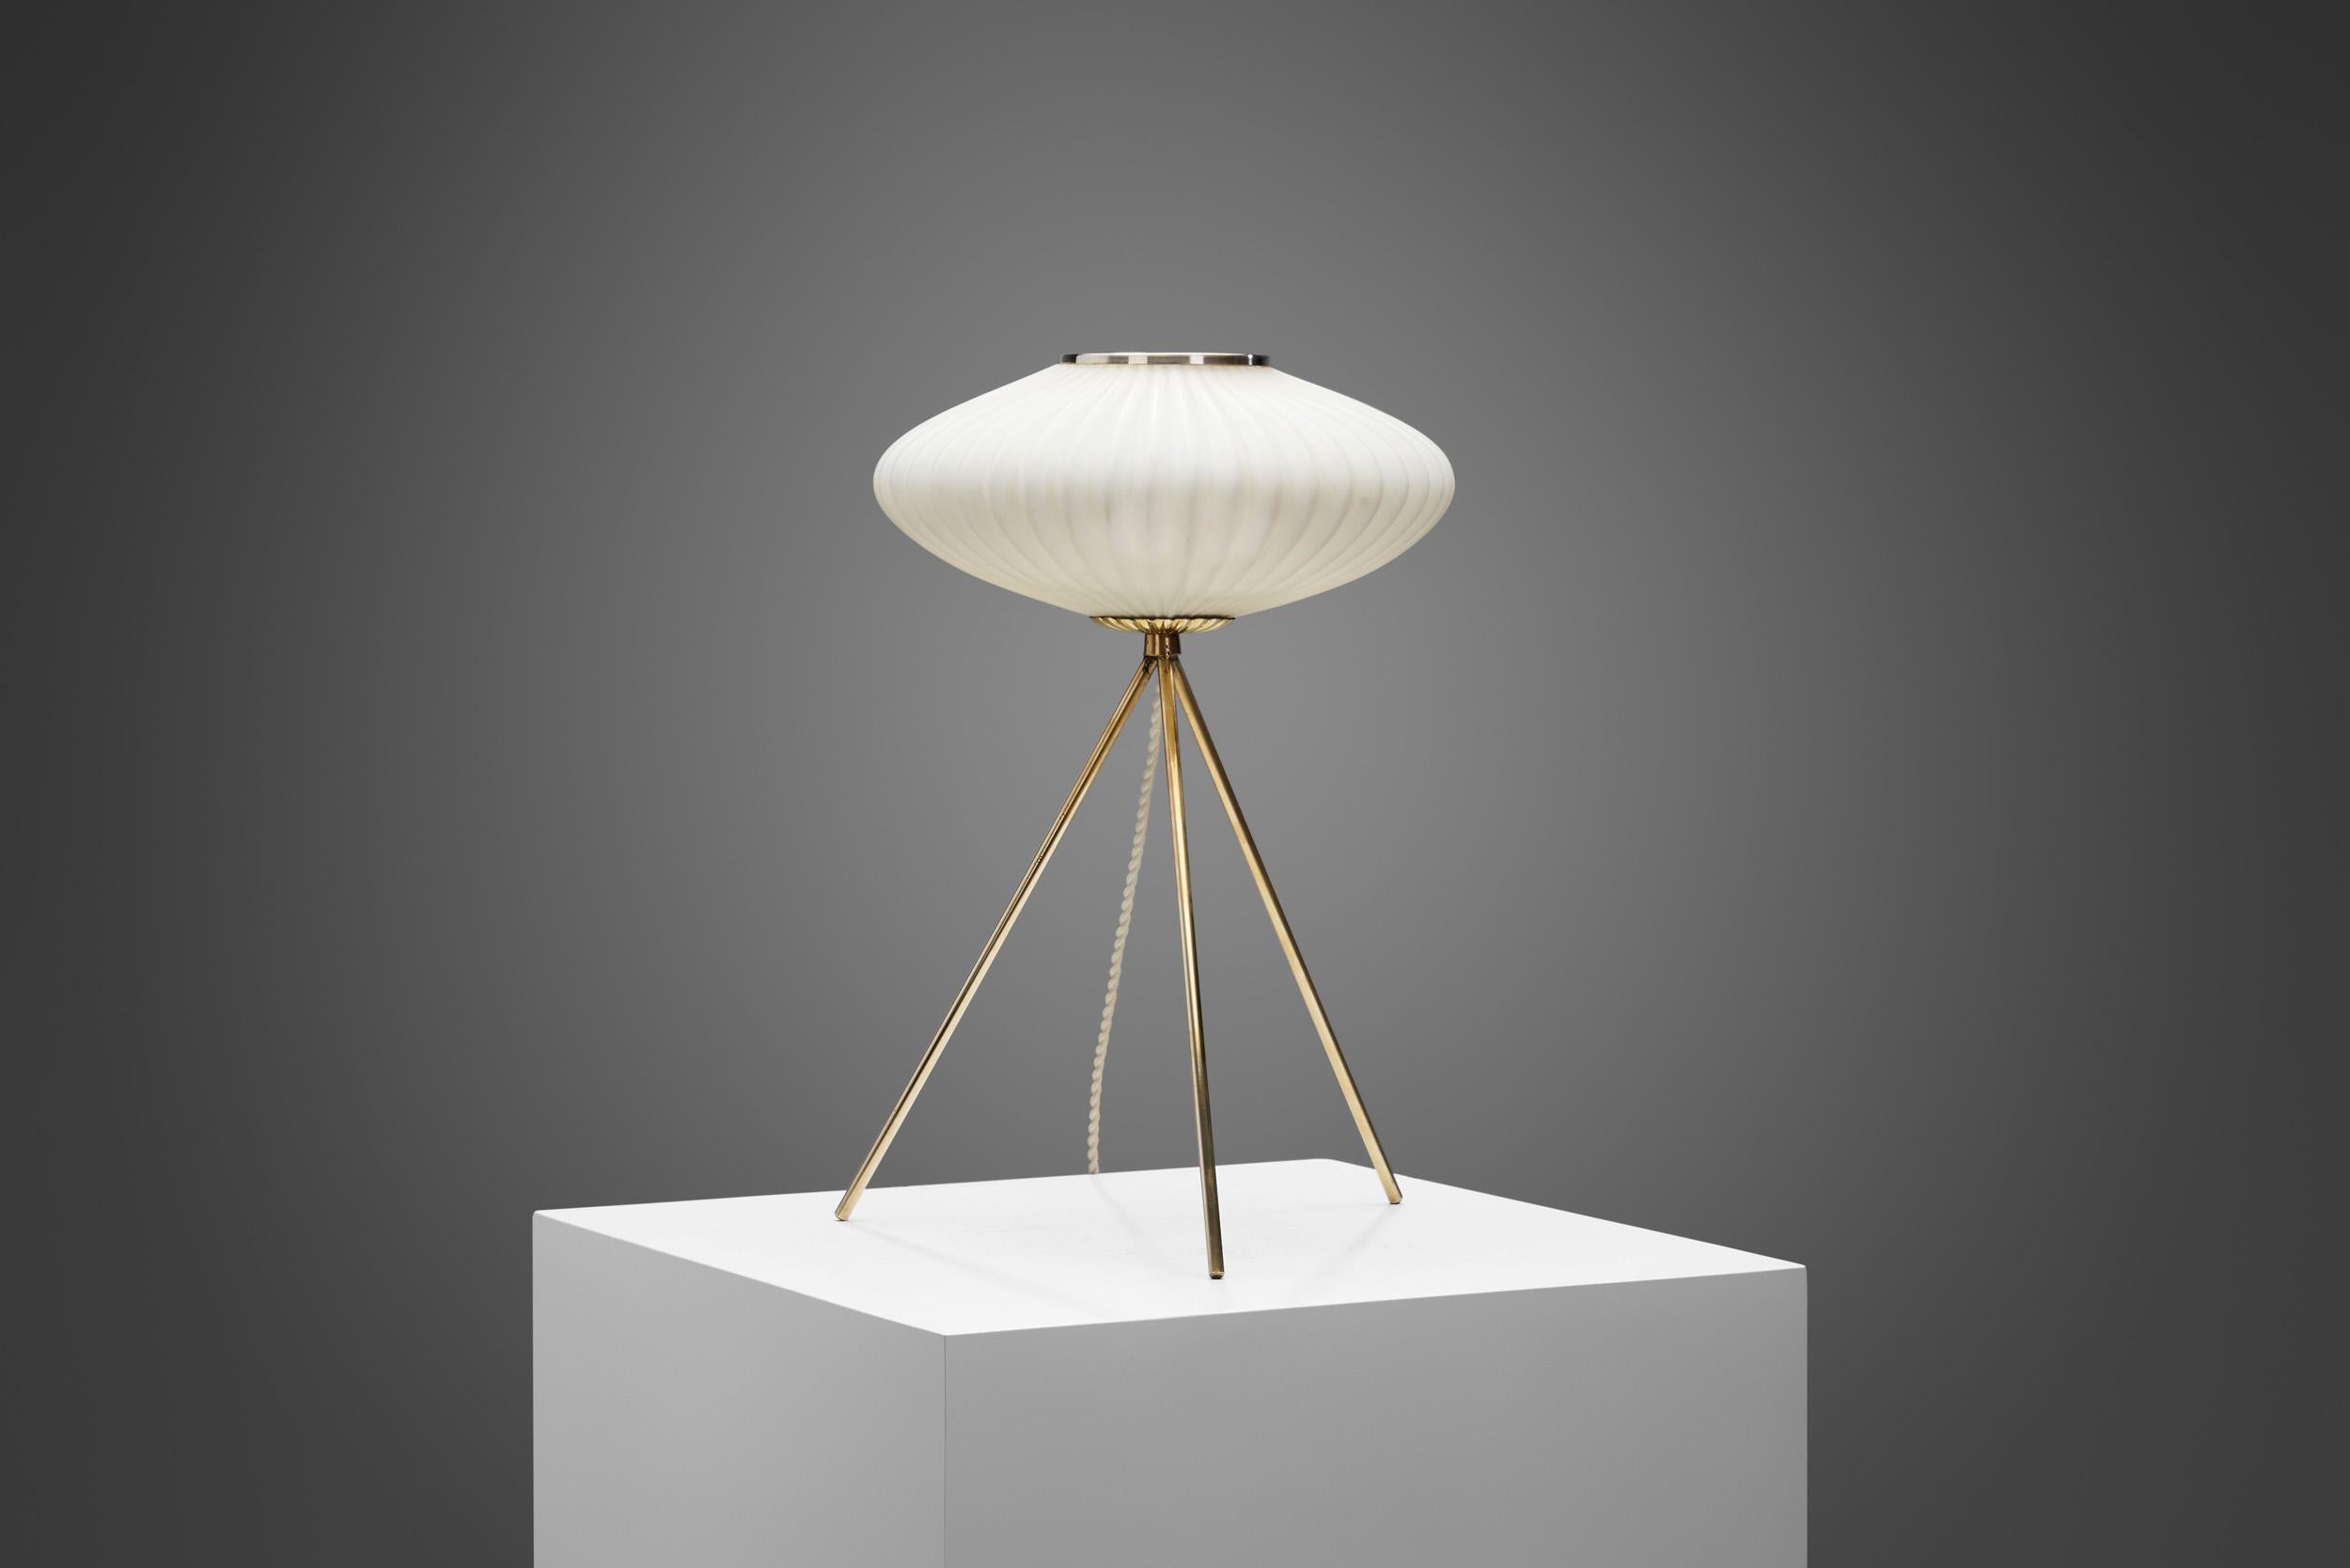 Mid-20th Century European Modern Tripod Table Lamp with Opal Glass Shade, Europe 1960s For Sale